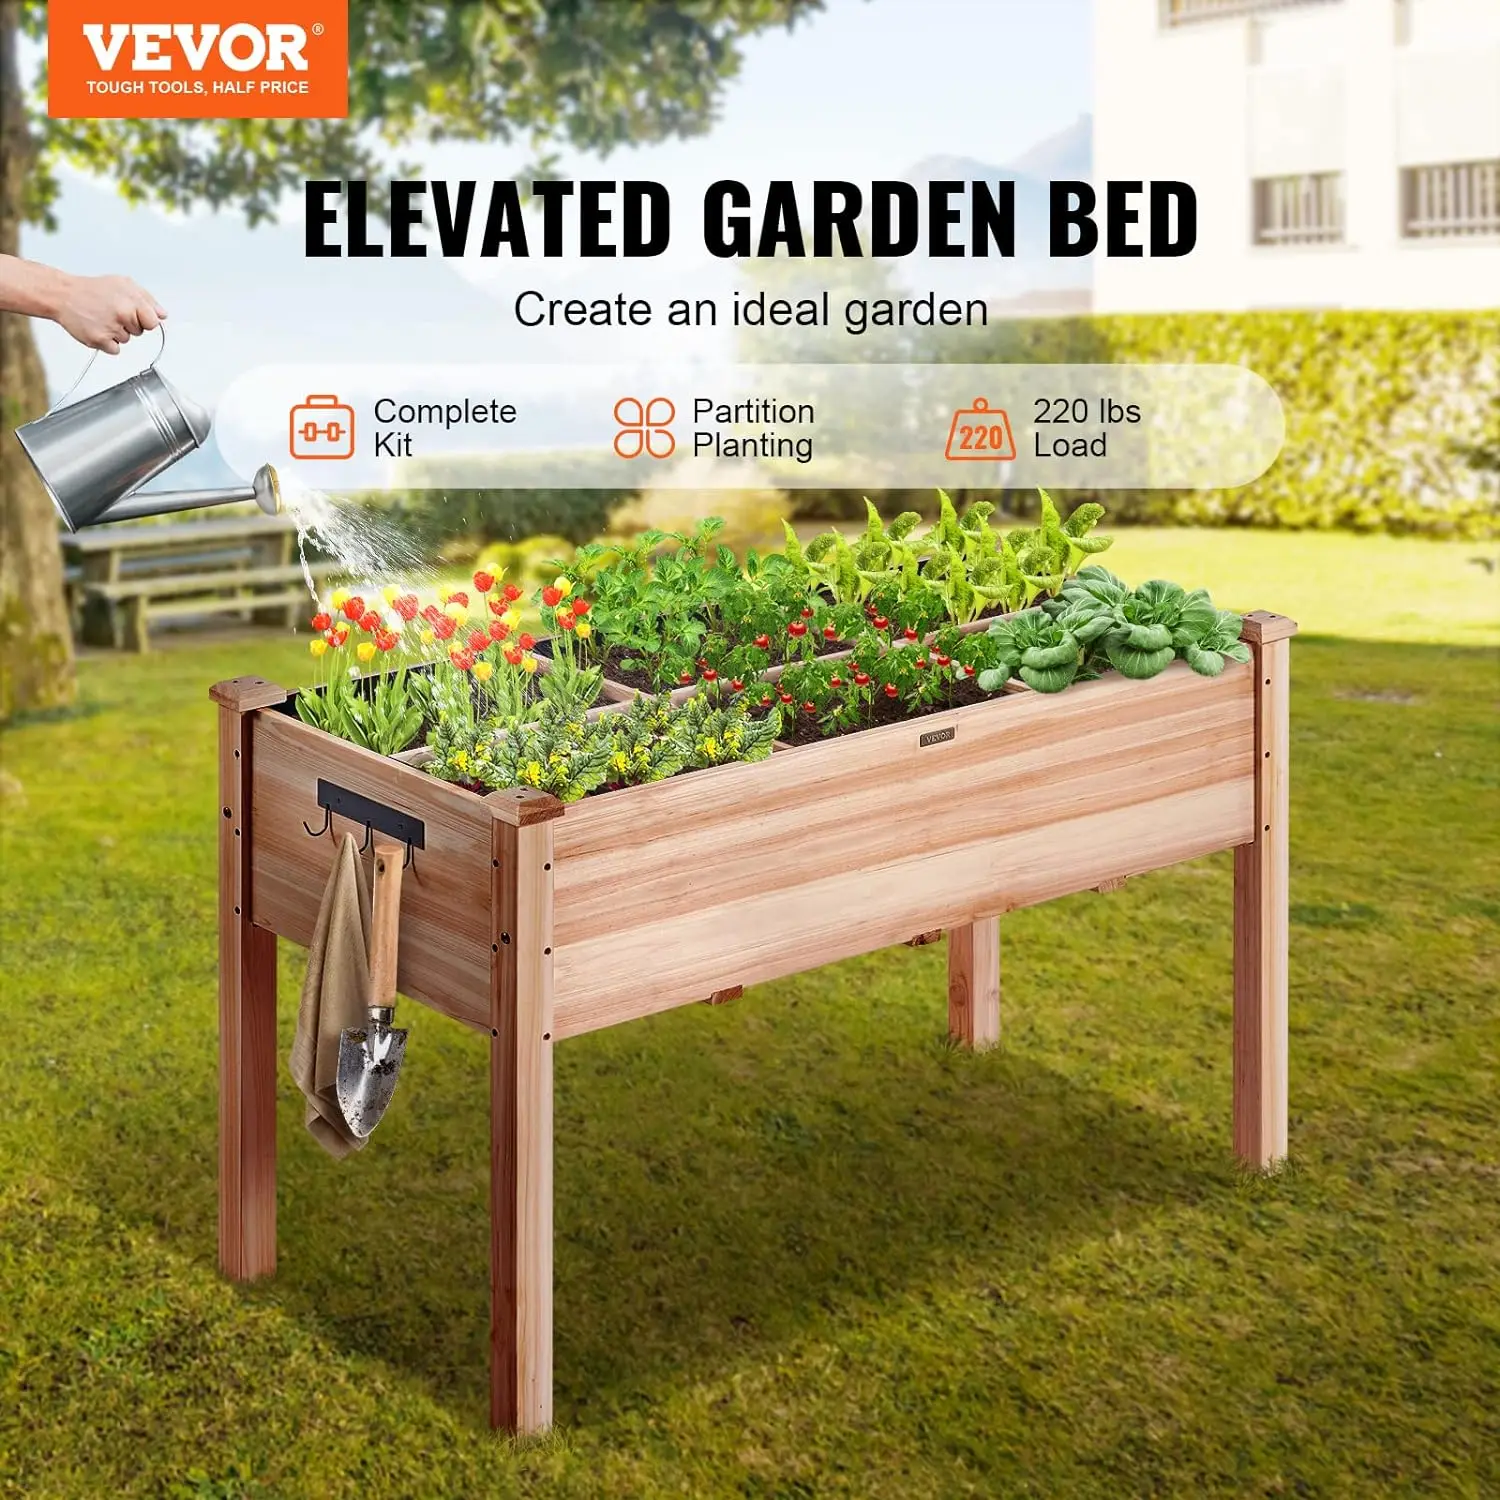 

Raised Garden Bed, Wooden Planter Box, Outdoor Planting Boxes with Legs, for Growing Flowers/Vegetables/Herbs in Backyard